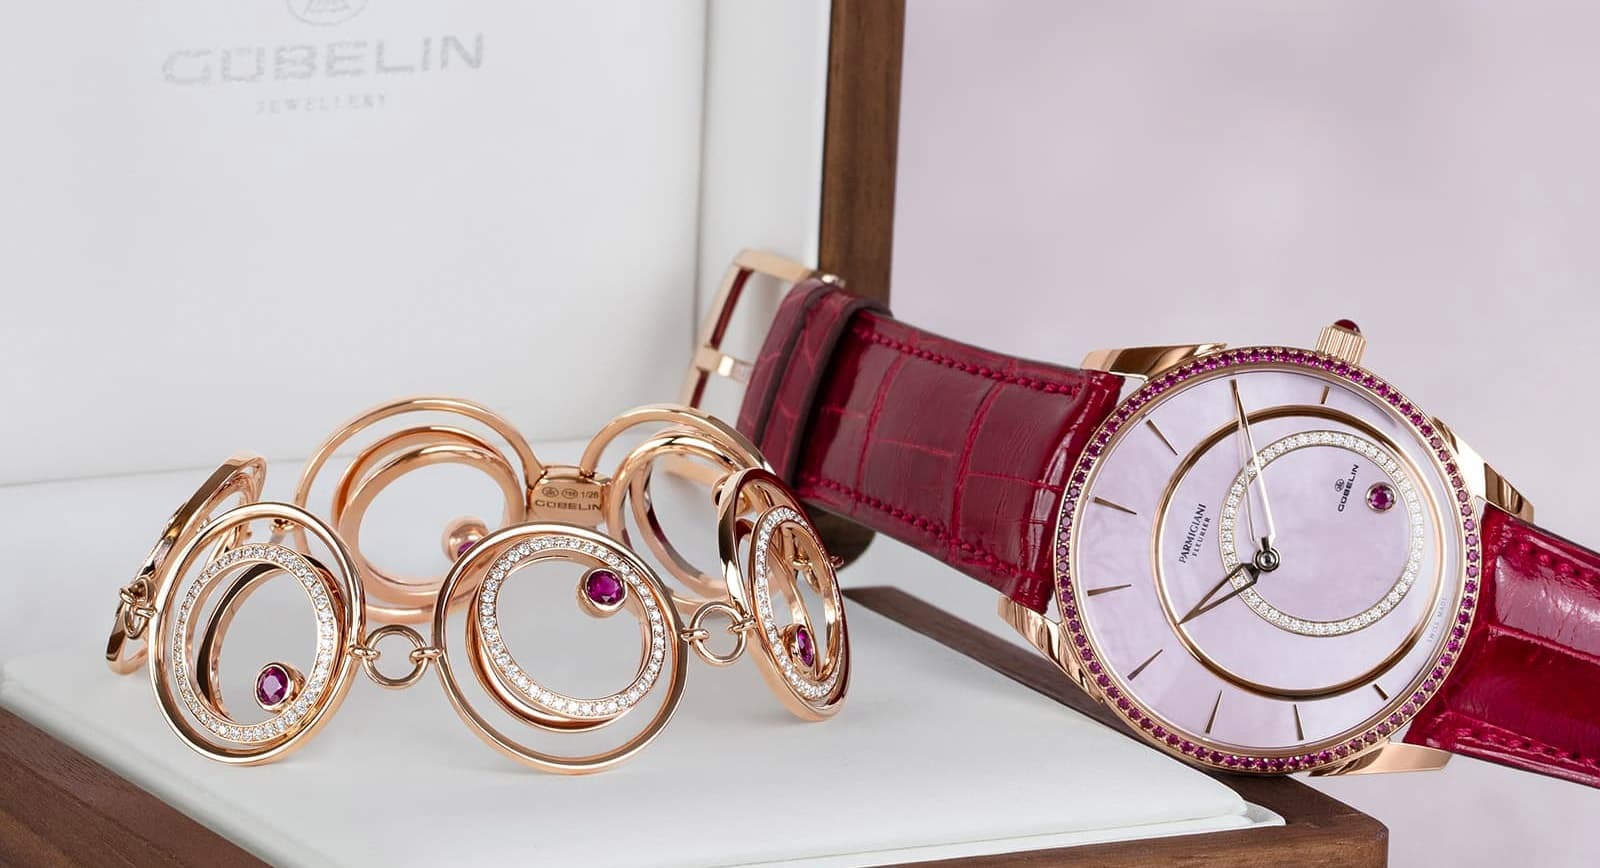 Bracelet and watch created in collaboration between  Gübelin Jewellery and Parmigiani Fleurier